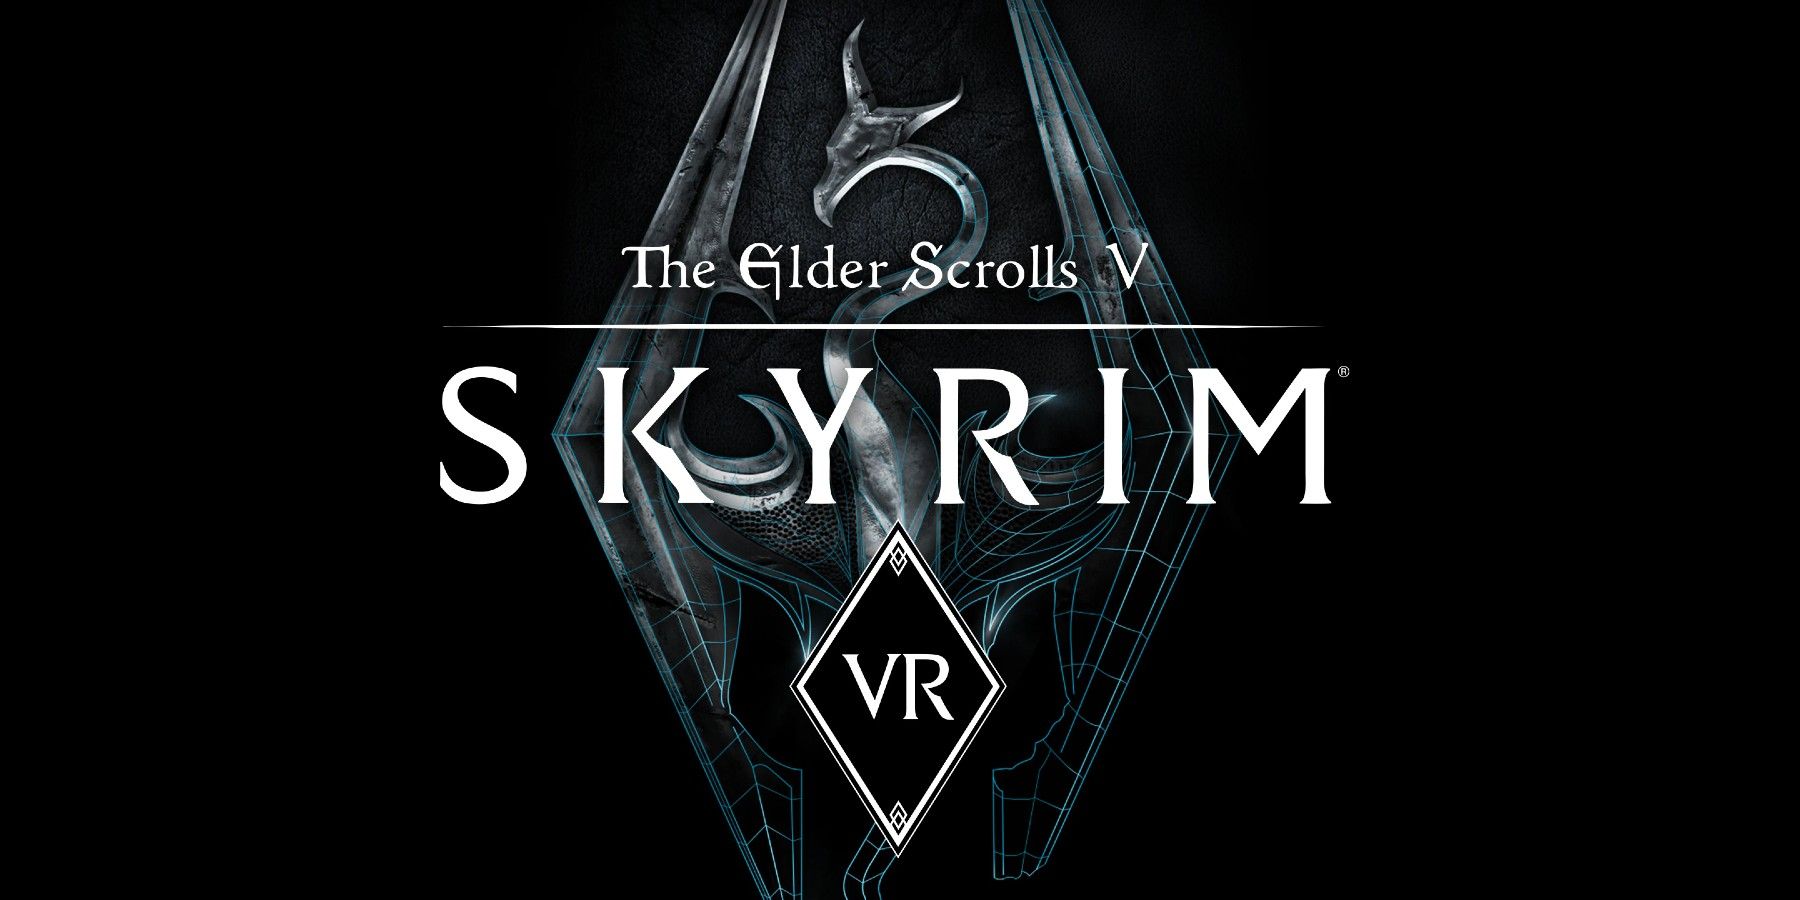 Skyrim VR Player Uses Oar to 'Golf' With Dead Body